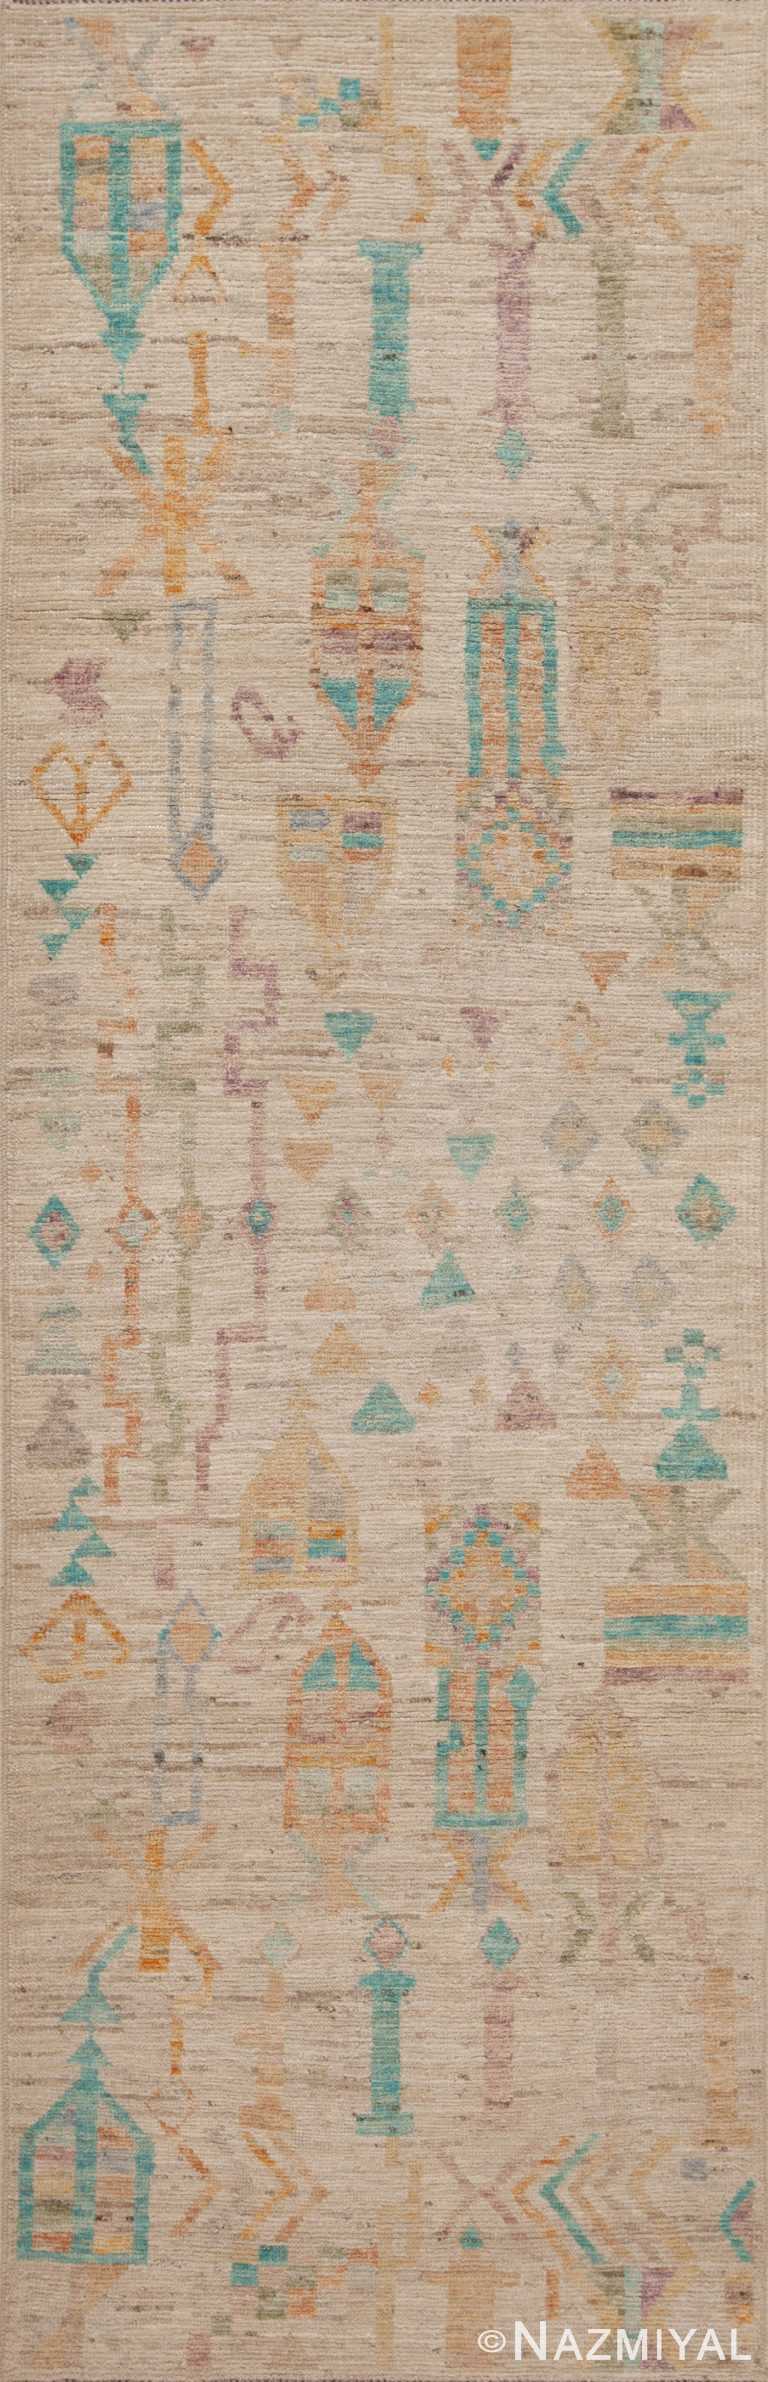 Captivating And Artistic Pastel Color Contemporary Modern Rustic Tribal Geometric Design Hallway Runner Rug 11039 by Nazmiyal Antique Rugs